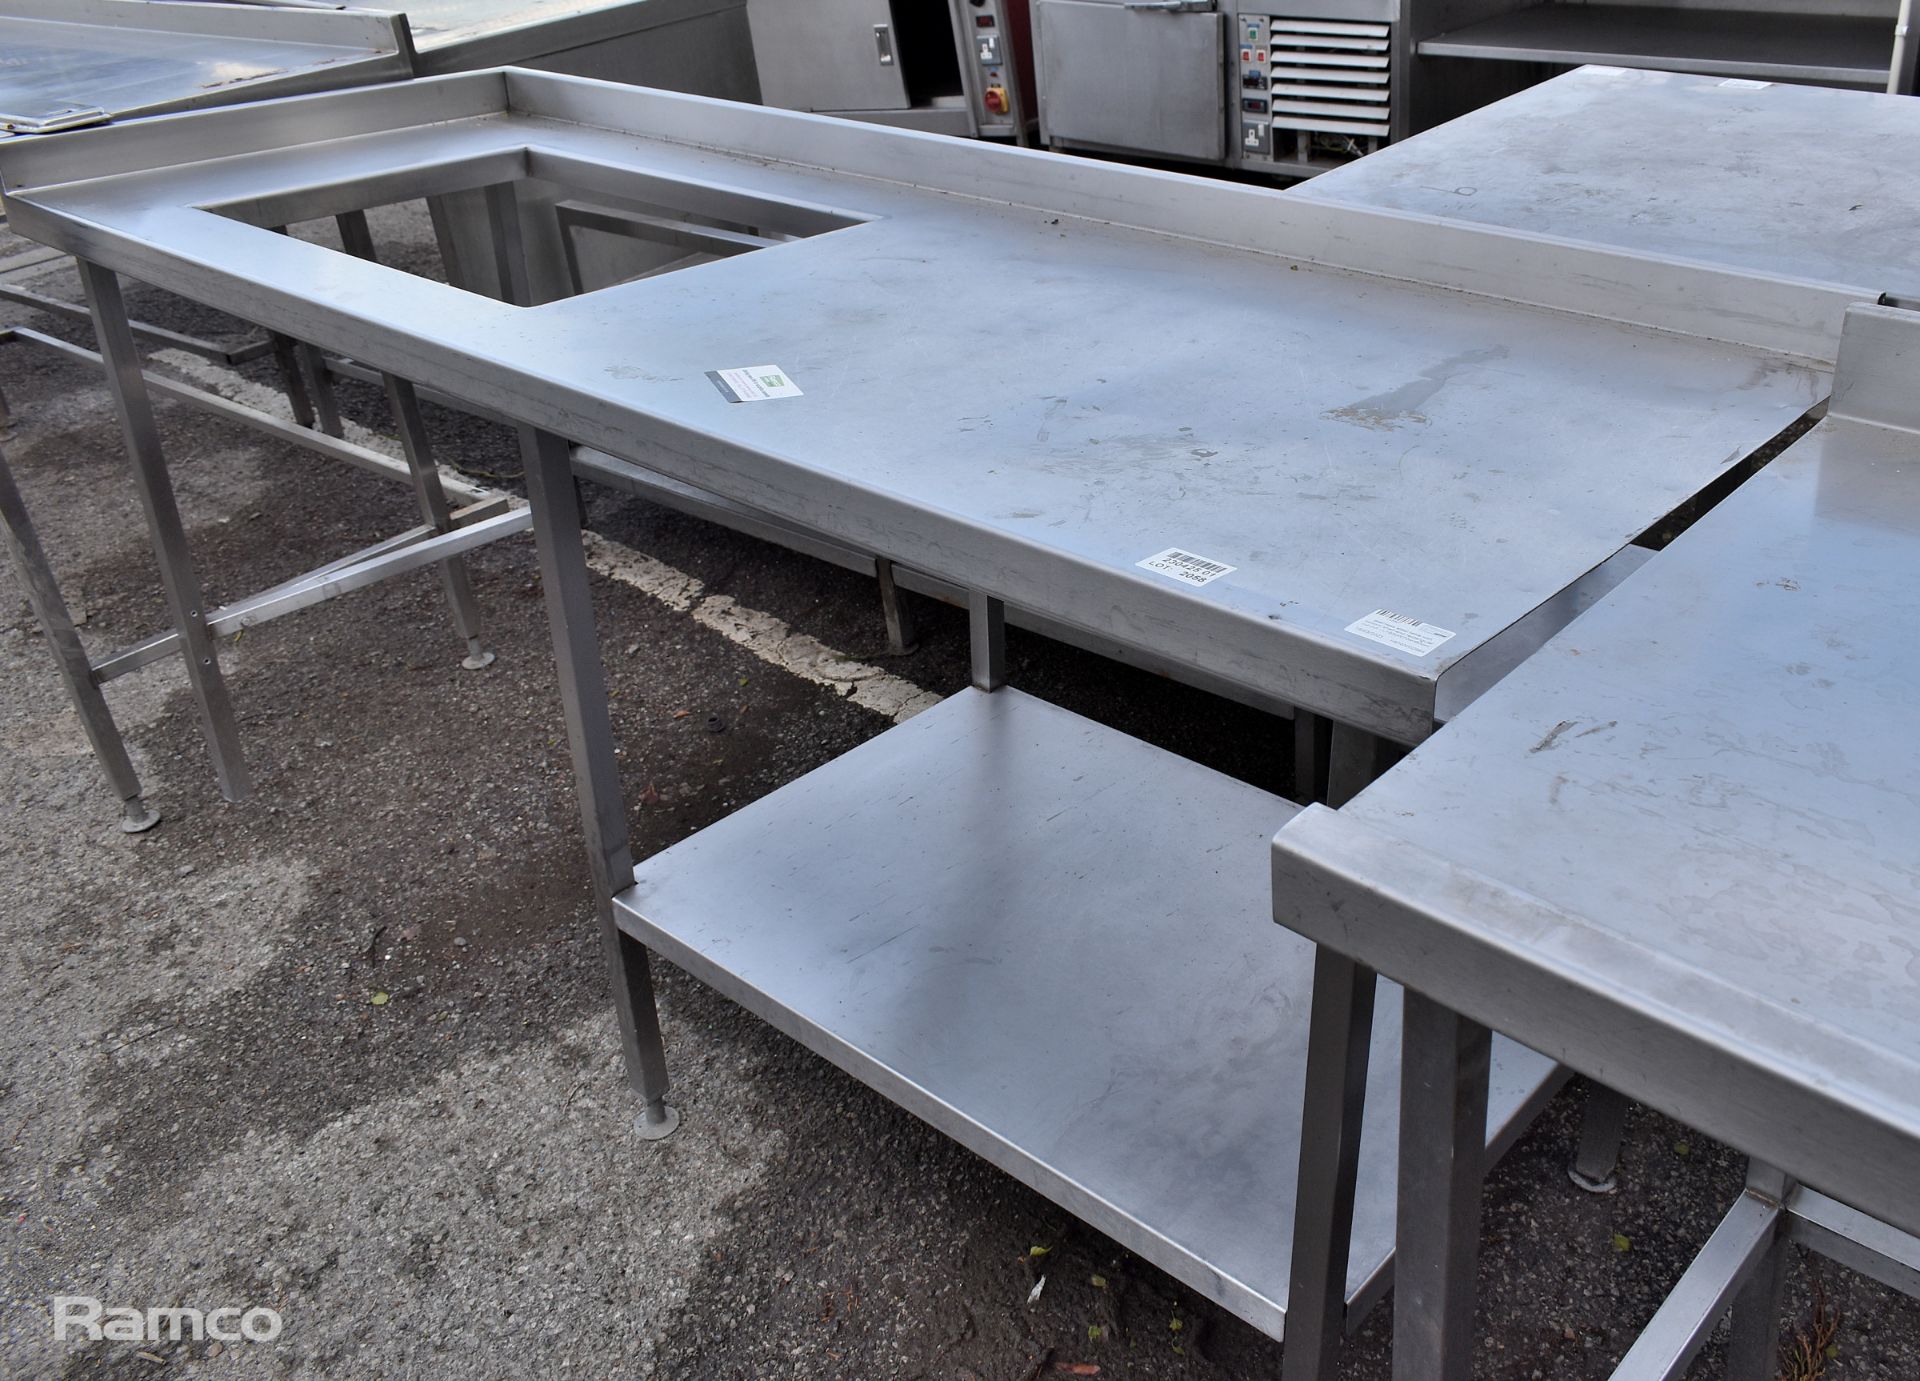 Stainless steel table with bottom shelf and rectangular cut out - L 193 x W 70 x H 90cm - Image 2 of 4